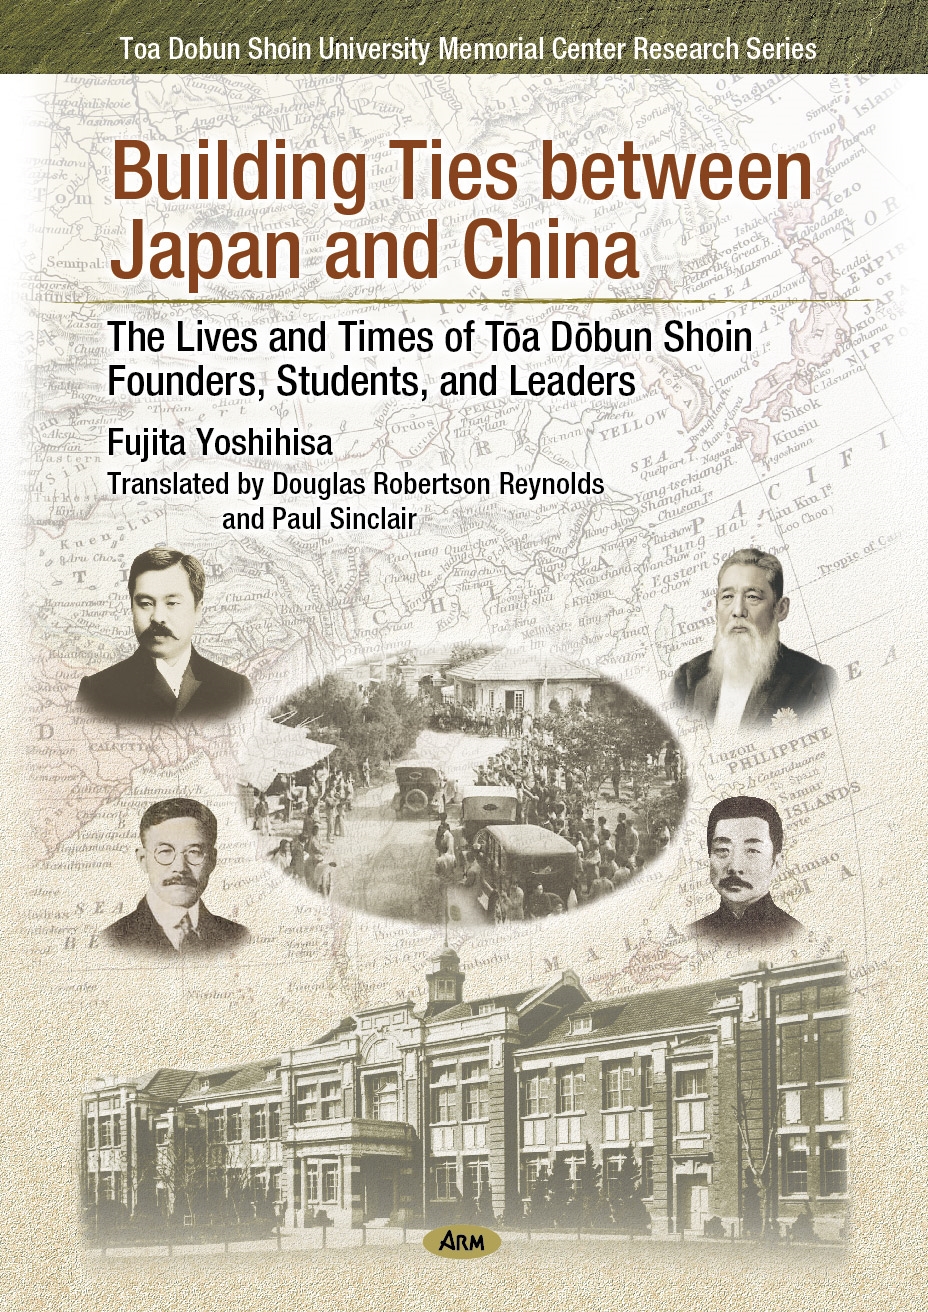 Douglas Robertson Reynolds/Building Ties between Japan and China Th e Lives Times of the T?a D?bun Shoin Founders, Students, Leaders